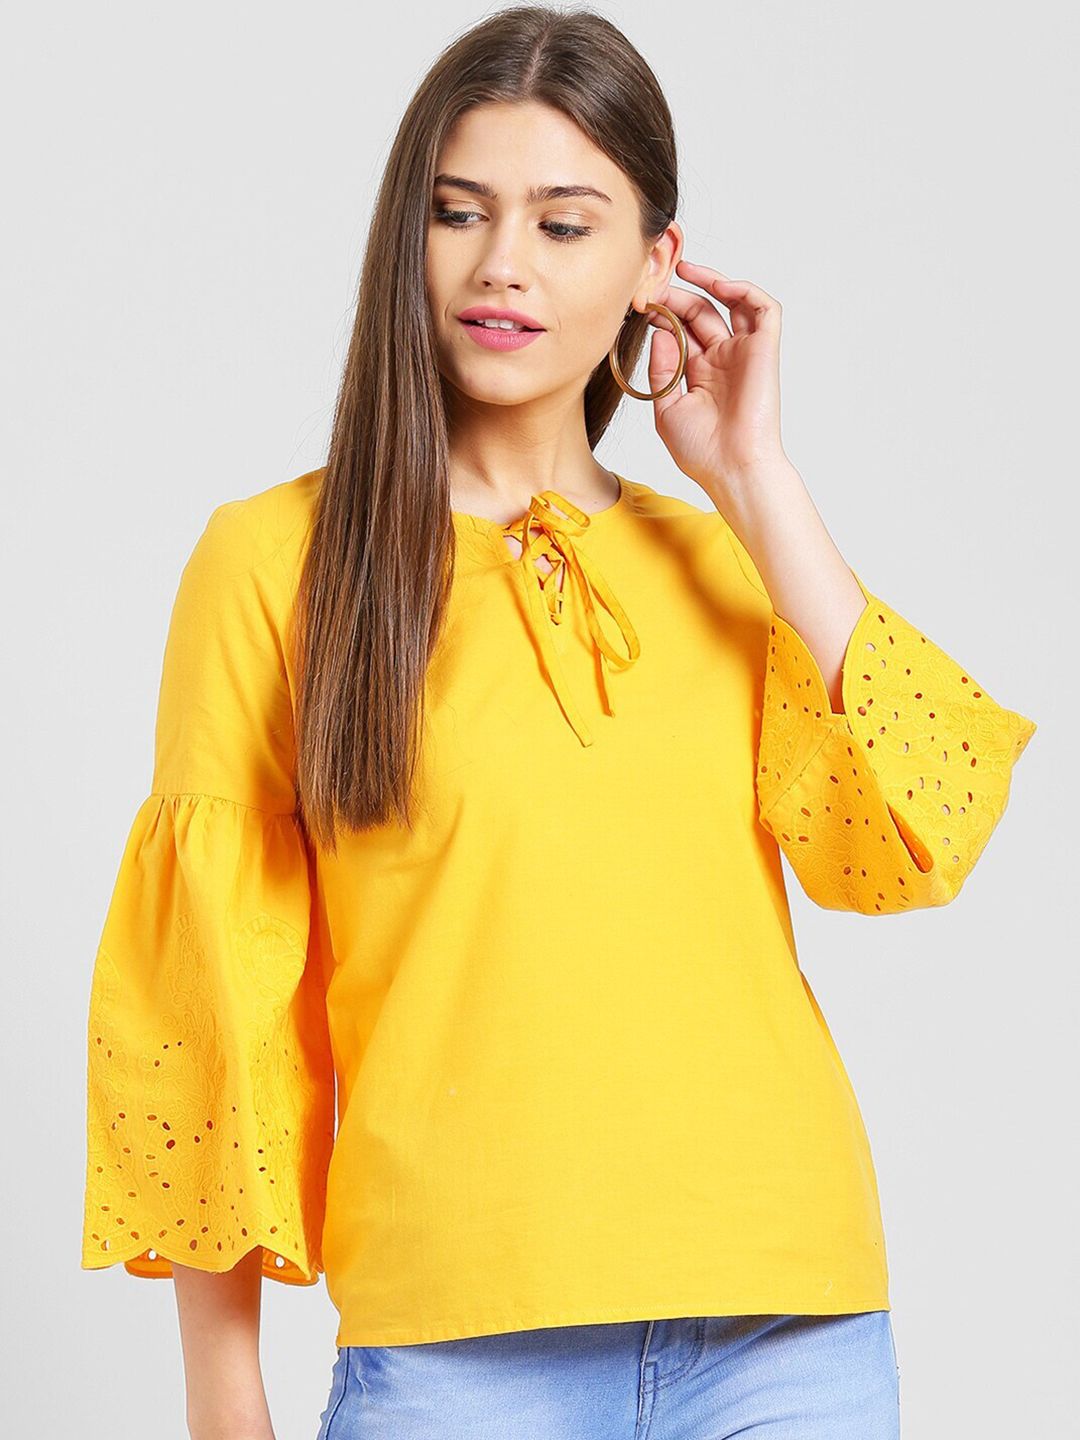 Be Indi Mustard Yellow Tie-Up Neck Top Price in India